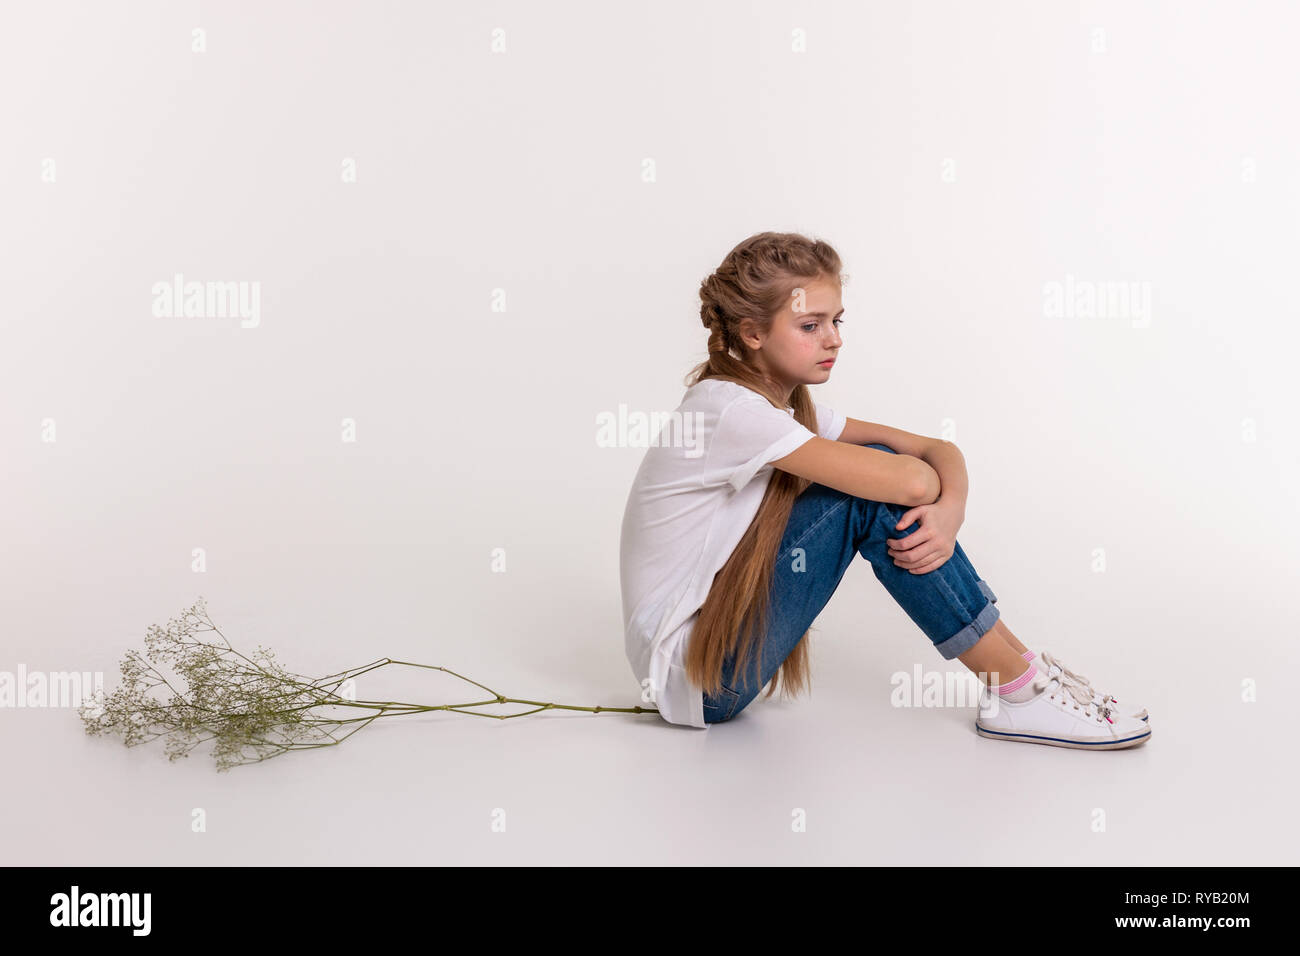 https://c8.alamy.com/comp/RYB20M/upset-young-girl-with-extremely-long-hair-sitting-in-closed-posture-RYB20M.jpg